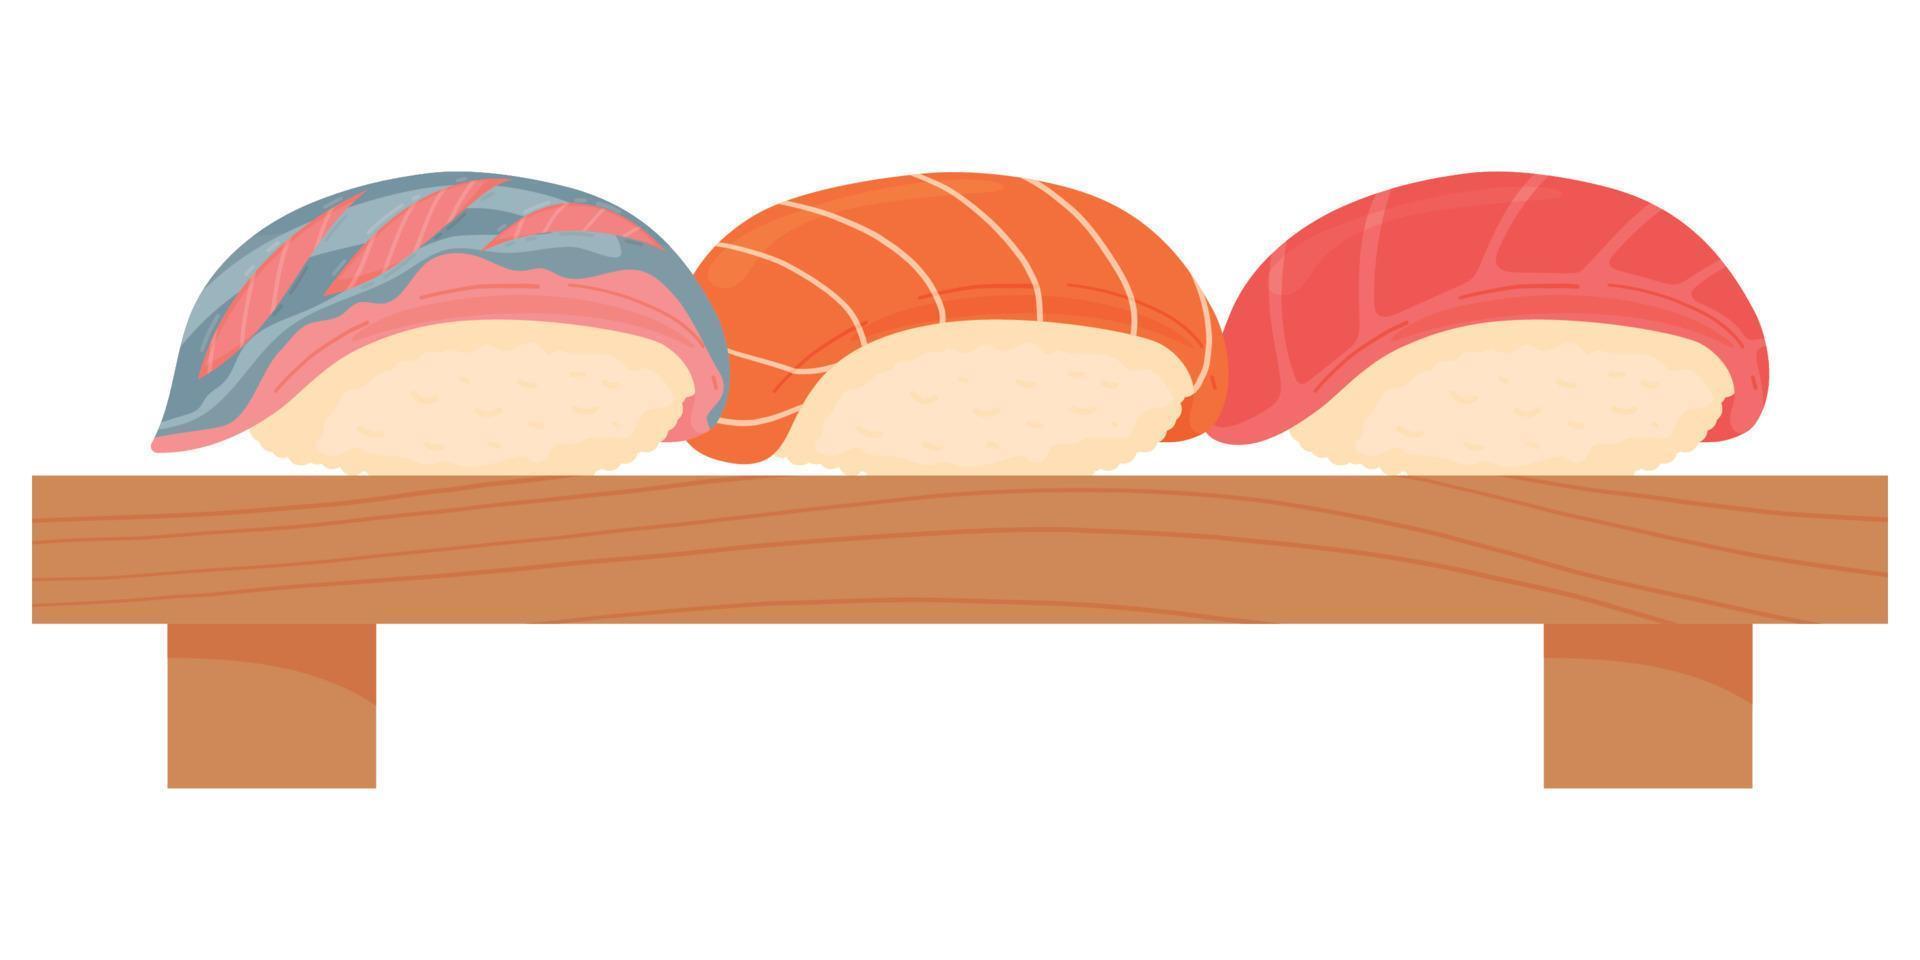 Cartoon salmon, tuna and iwashi sushi on wooden board. Asian food Japanese cuisine, traditional food isolated on white background vector